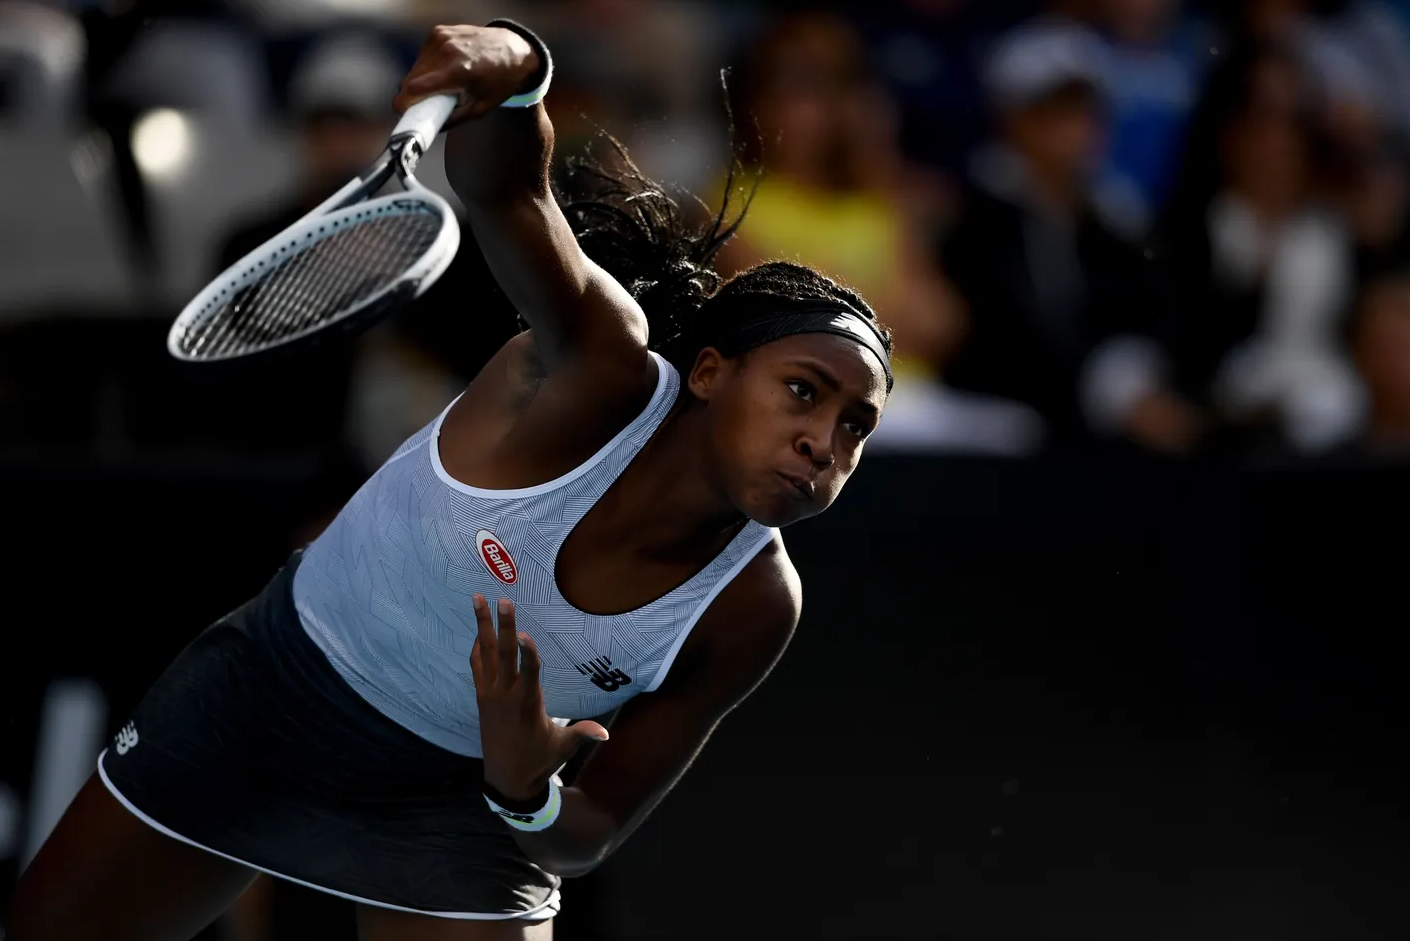 Auckland - Gauff to face Makarova in the final